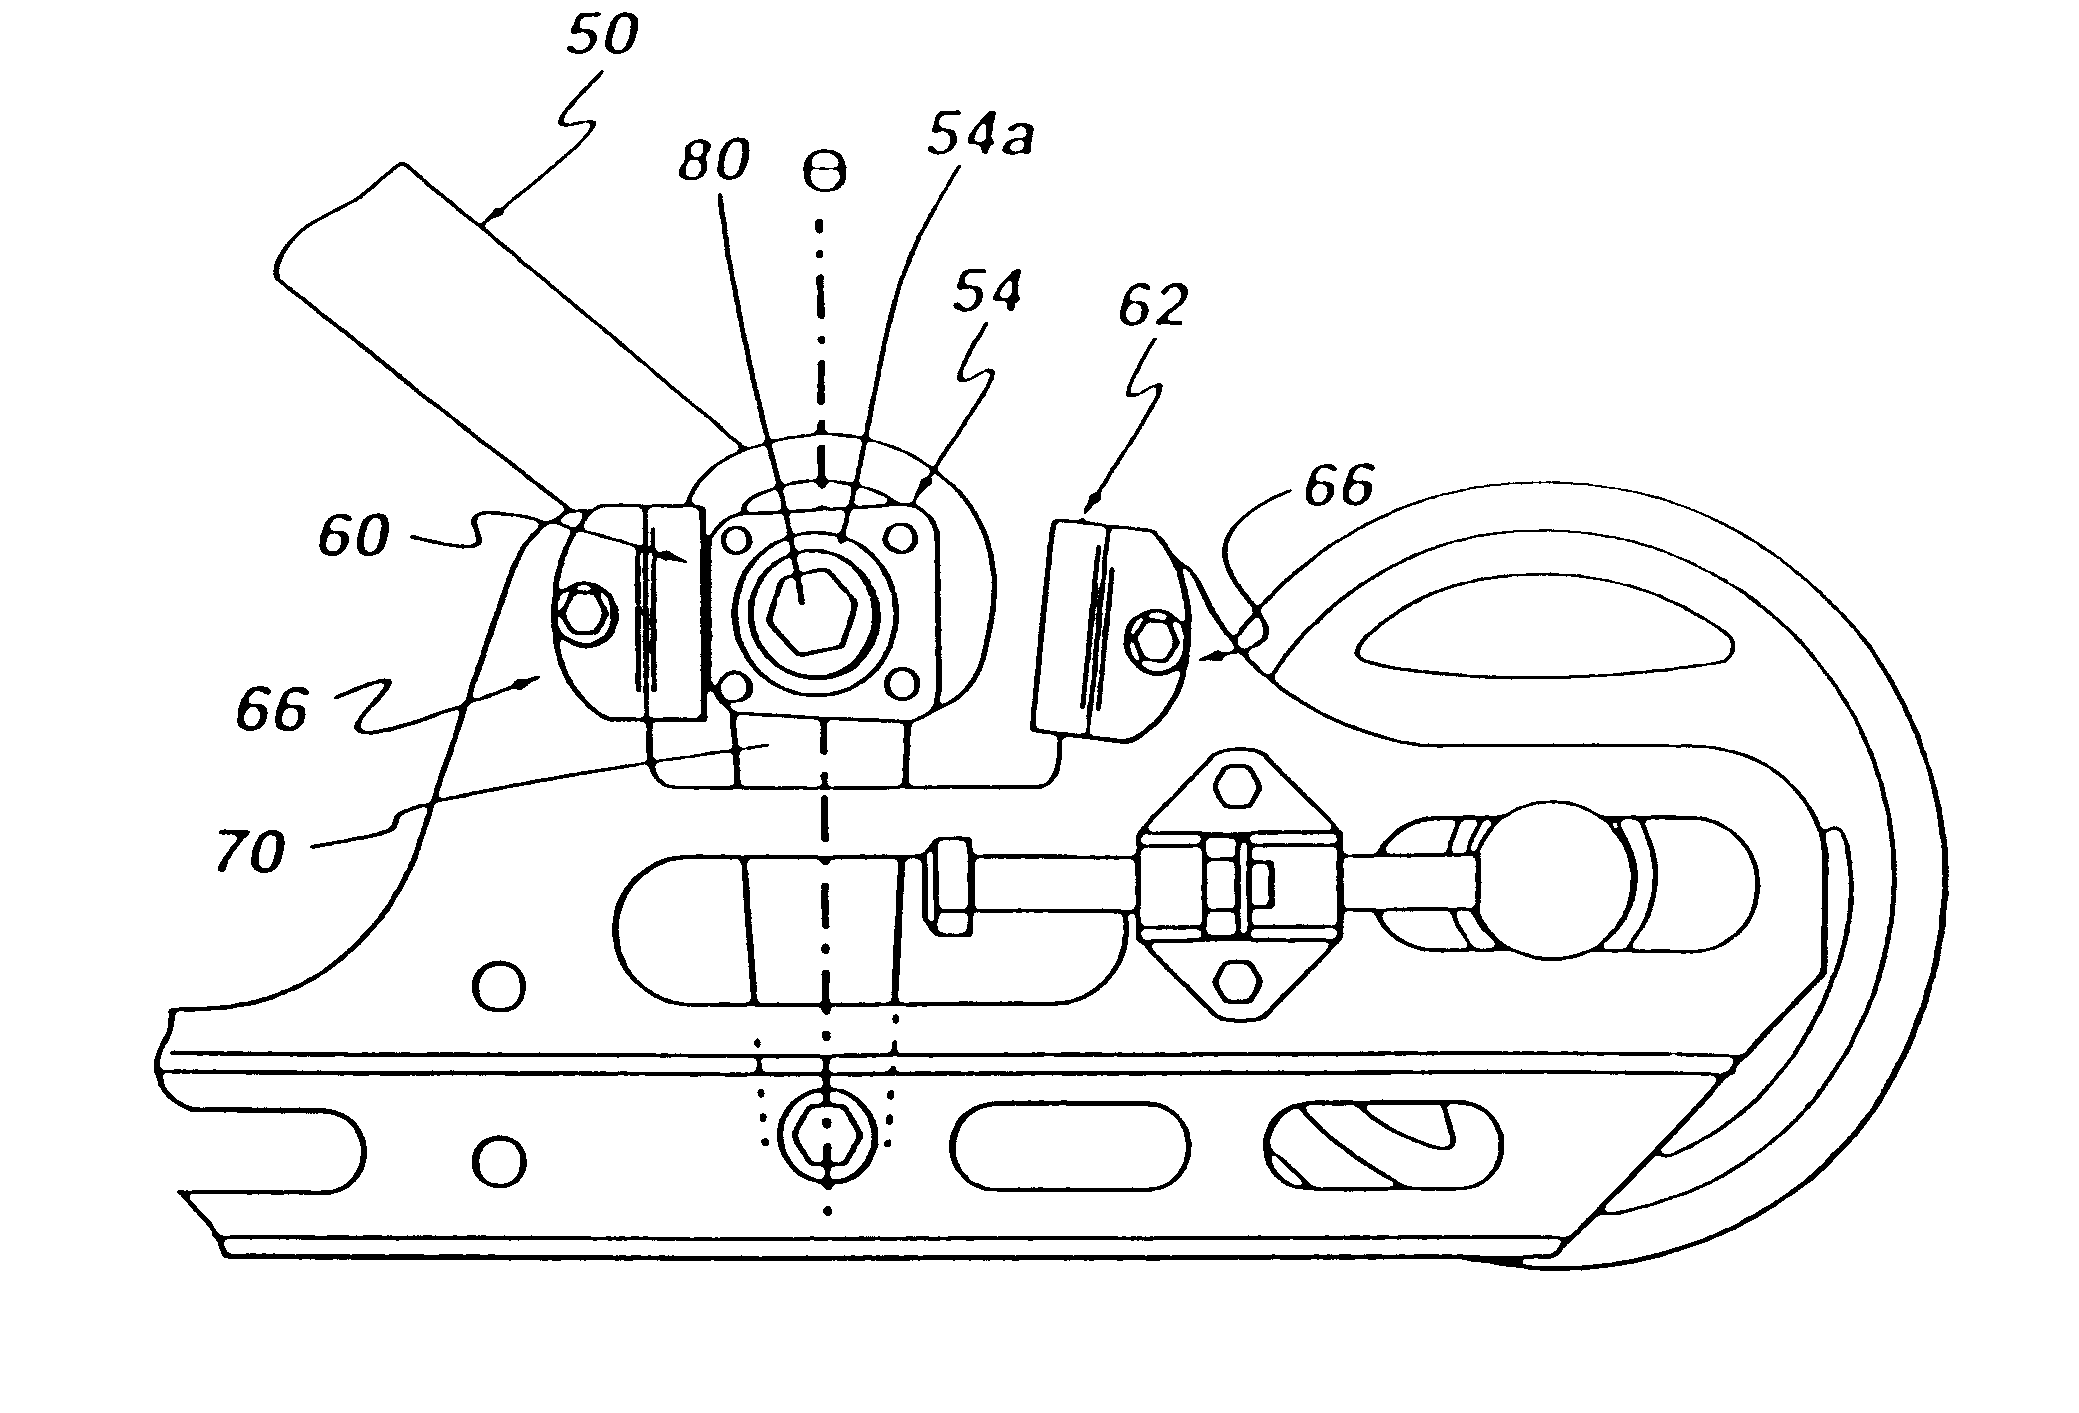 Adjustable rear suspension for a tracked vehicle